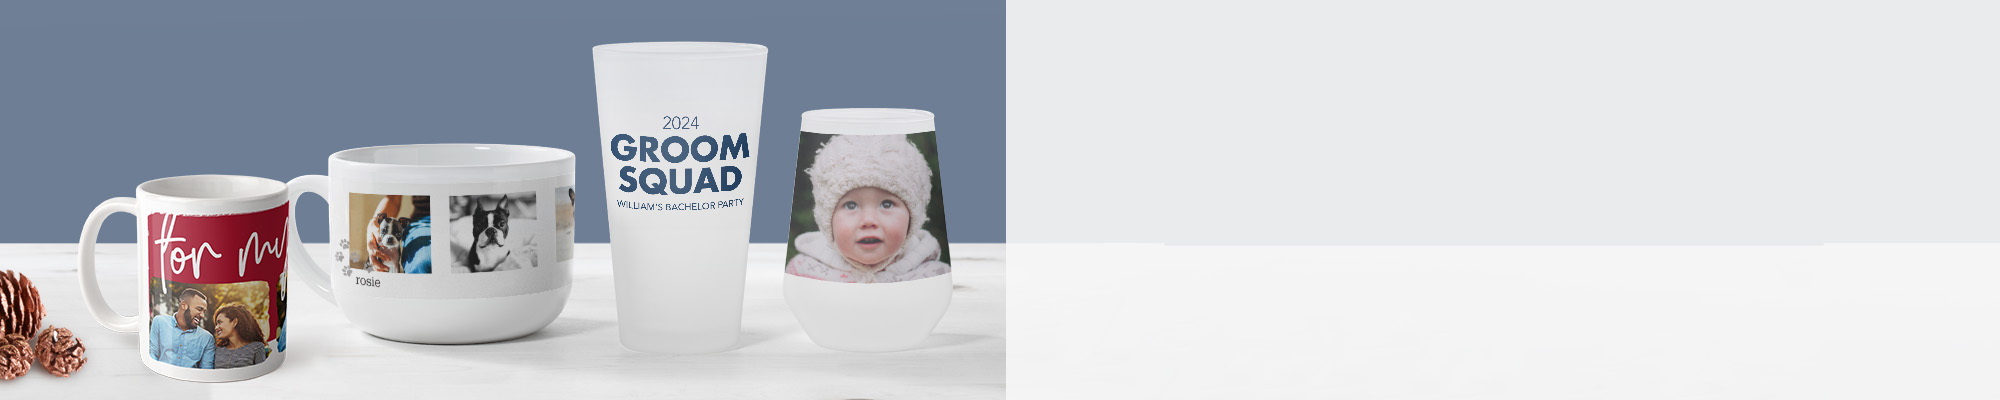 Design Custom Mugs for Yourself or Your Online Store